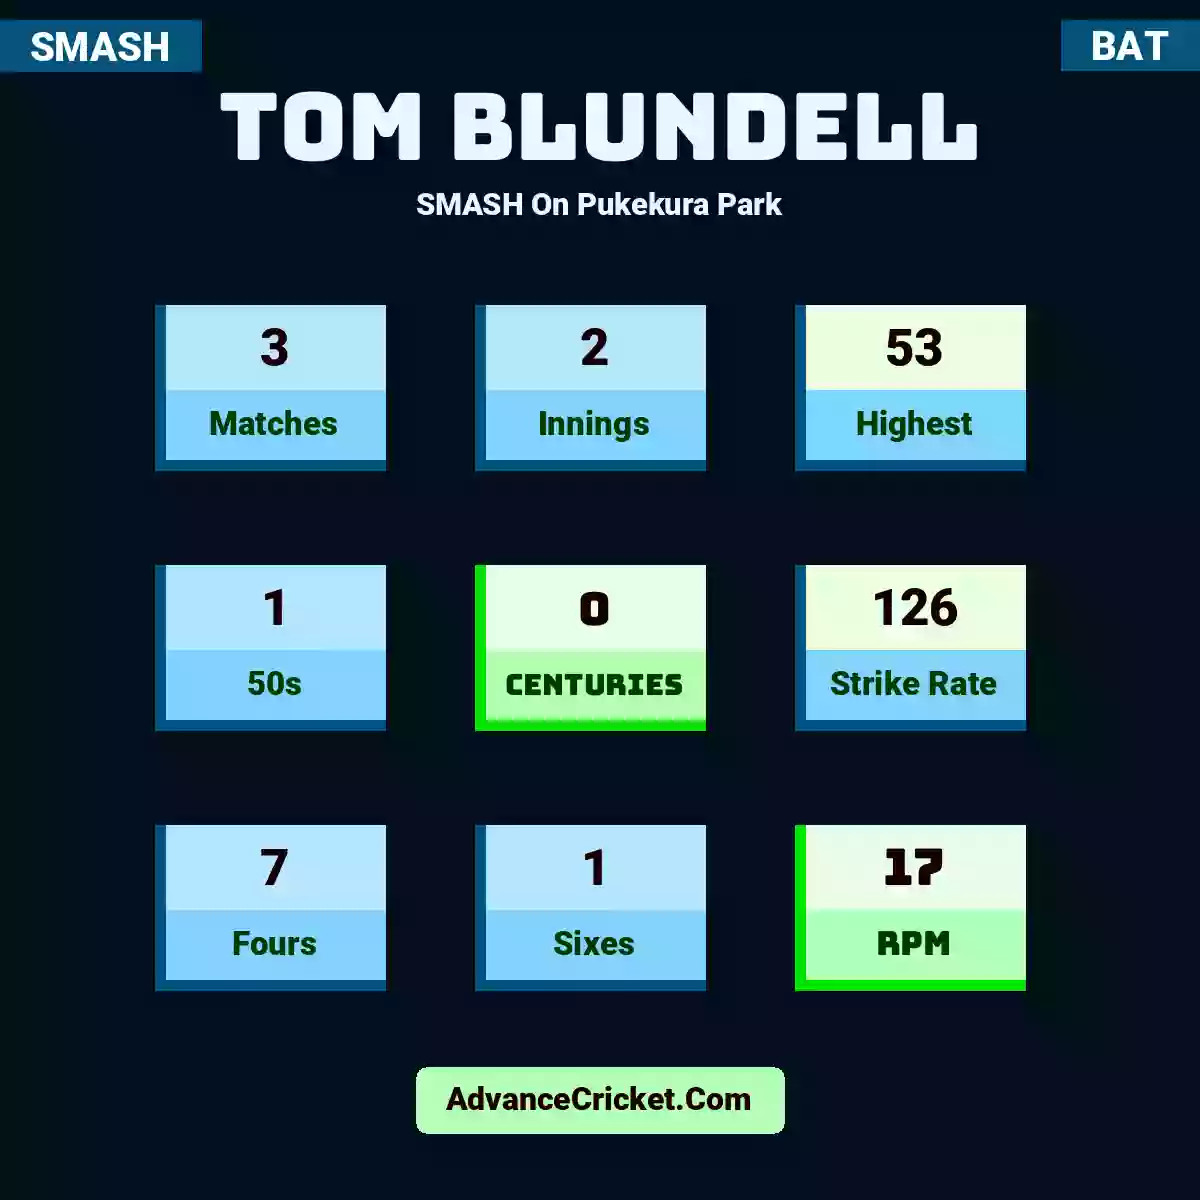 Tom Blundell SMASH  On Pukekura Park, Tom Blundell played 3 matches, scored 53 runs as highest, 1 half-centuries, and 0 centuries, with a strike rate of 126. T.Blundell hit 7 fours and 1 sixes, with an RPM of 17.